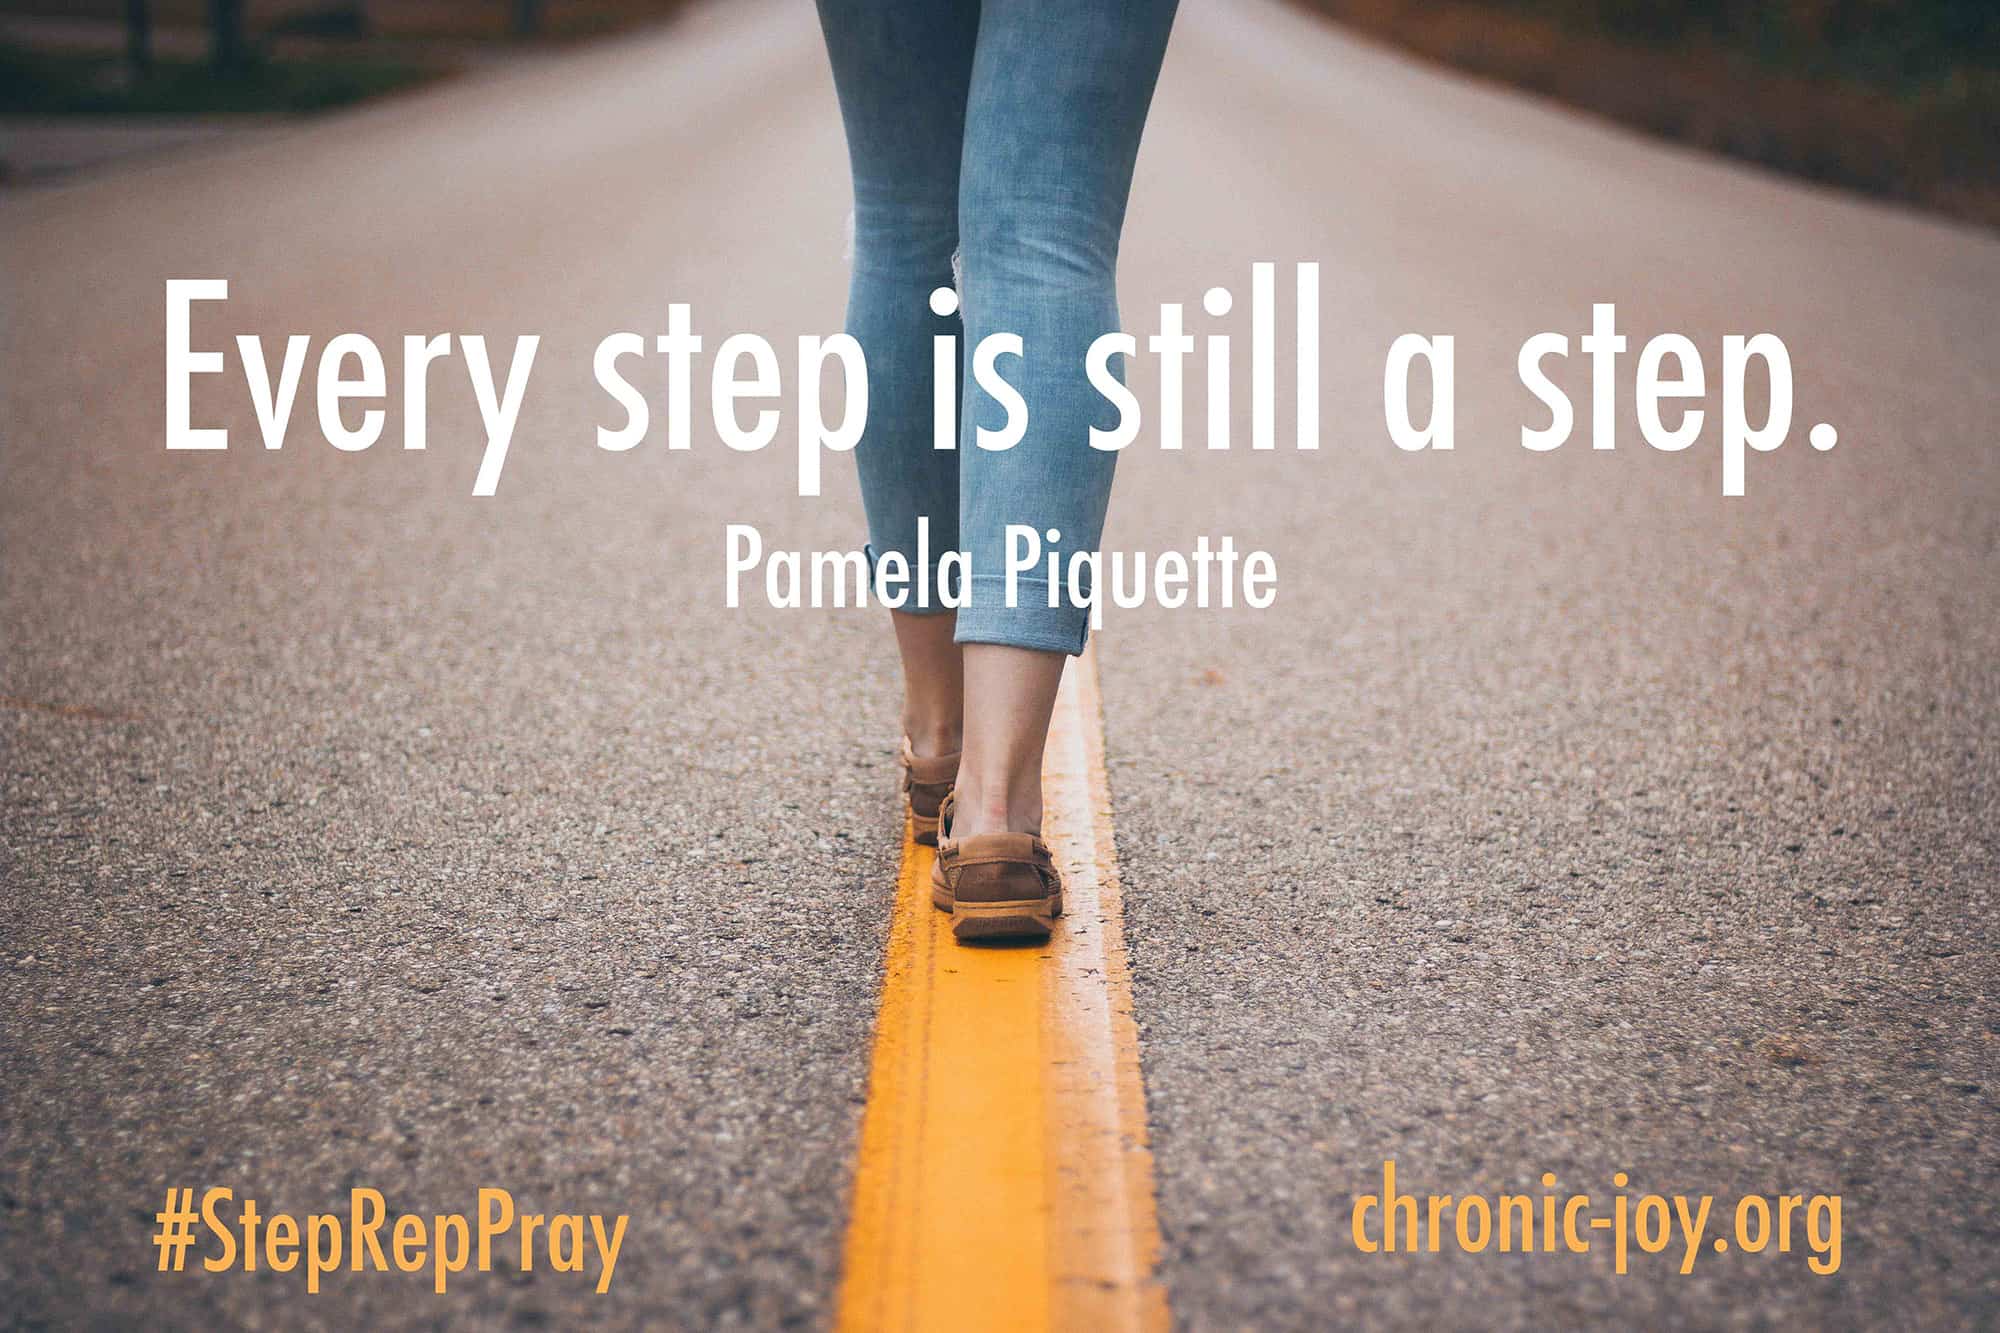 Every step is still a step.